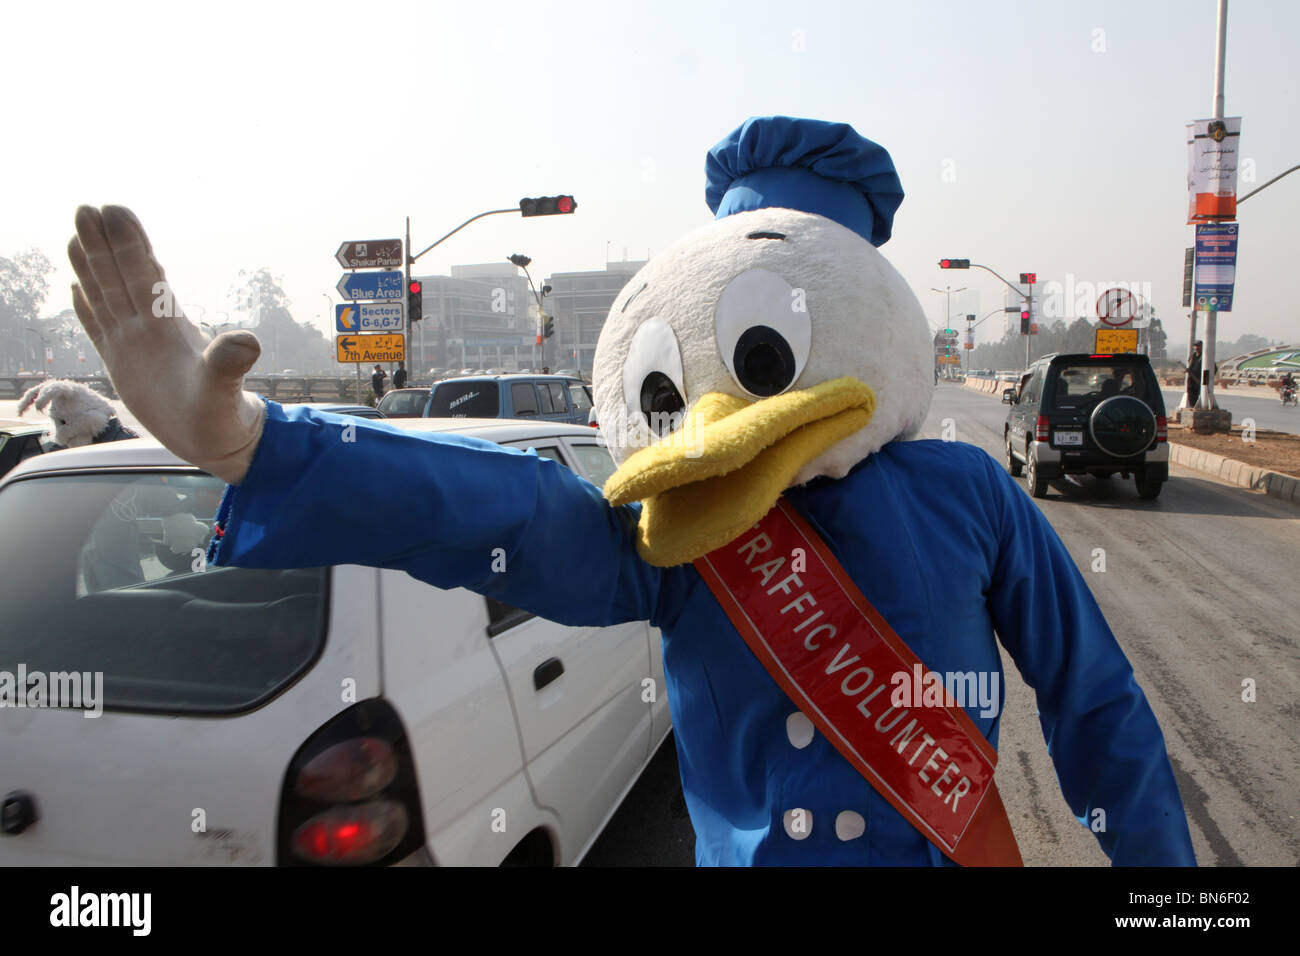 promotion by traffic police with walt disney characters Stock Photo